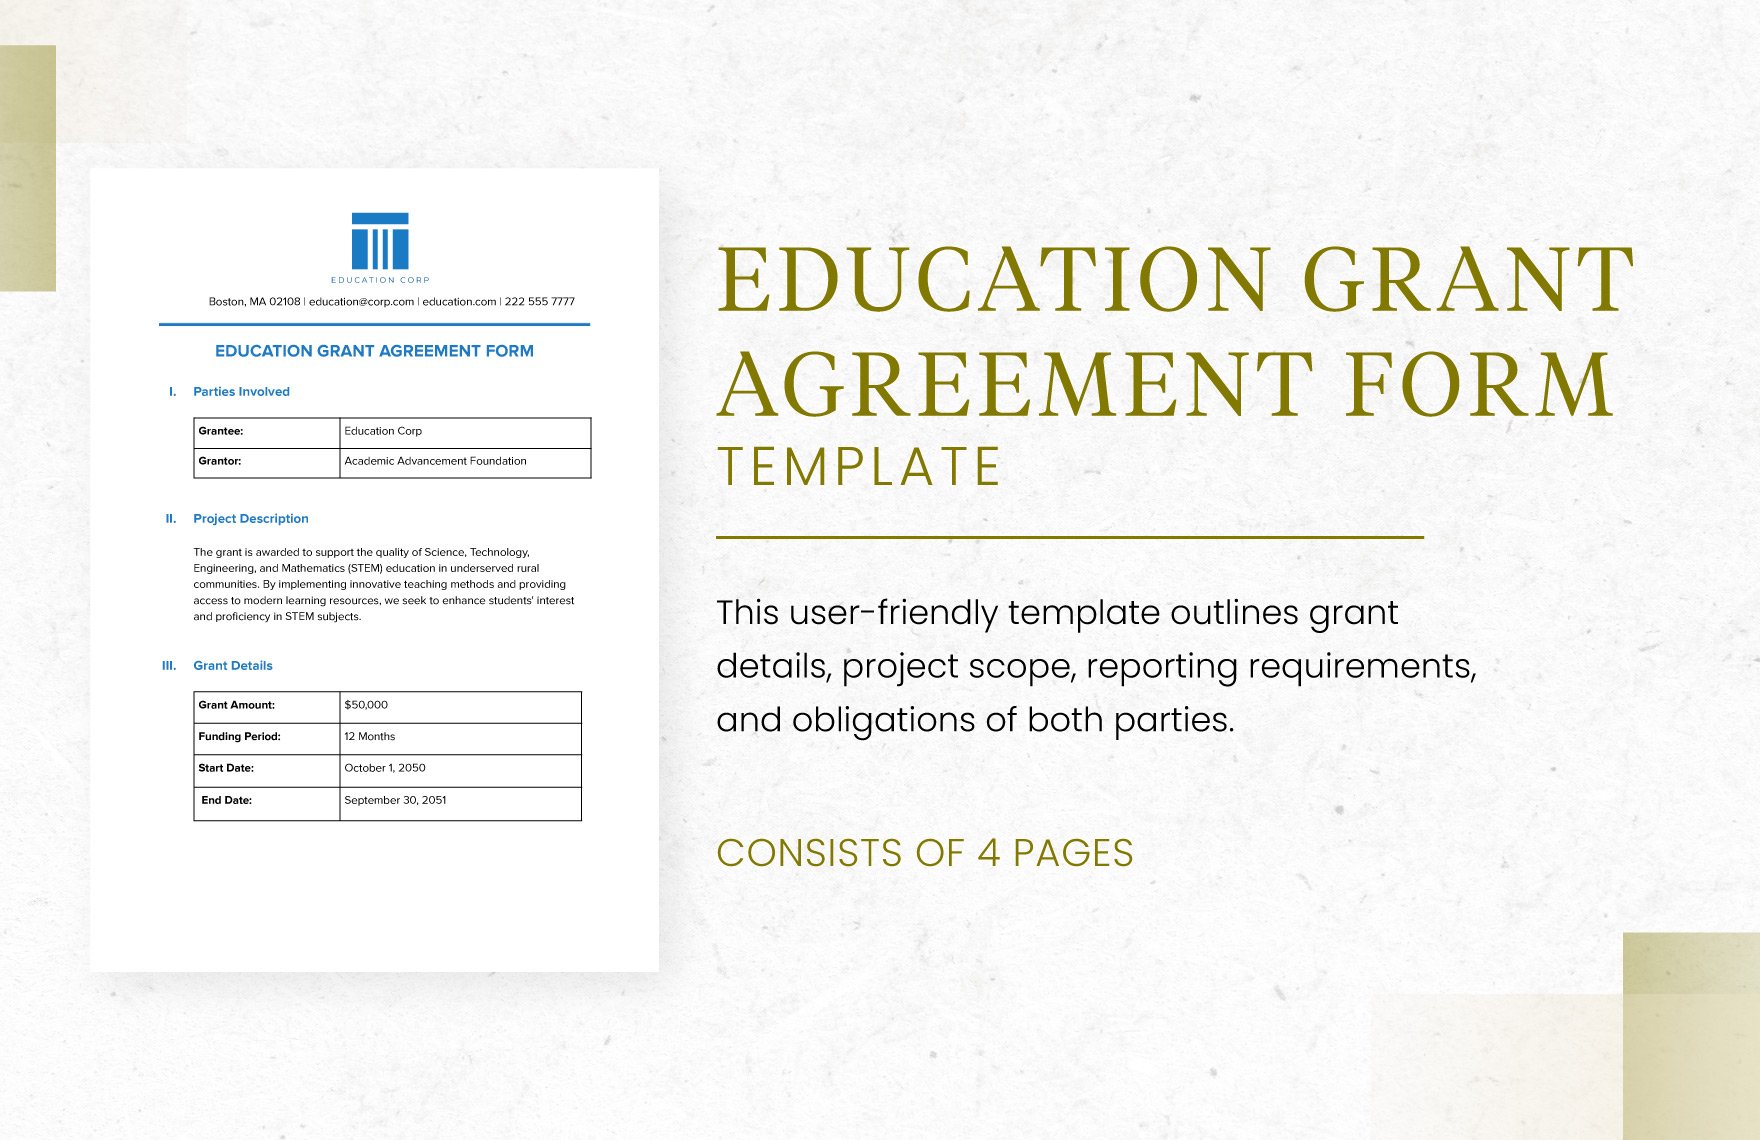 Education Grant Agreement Form Template